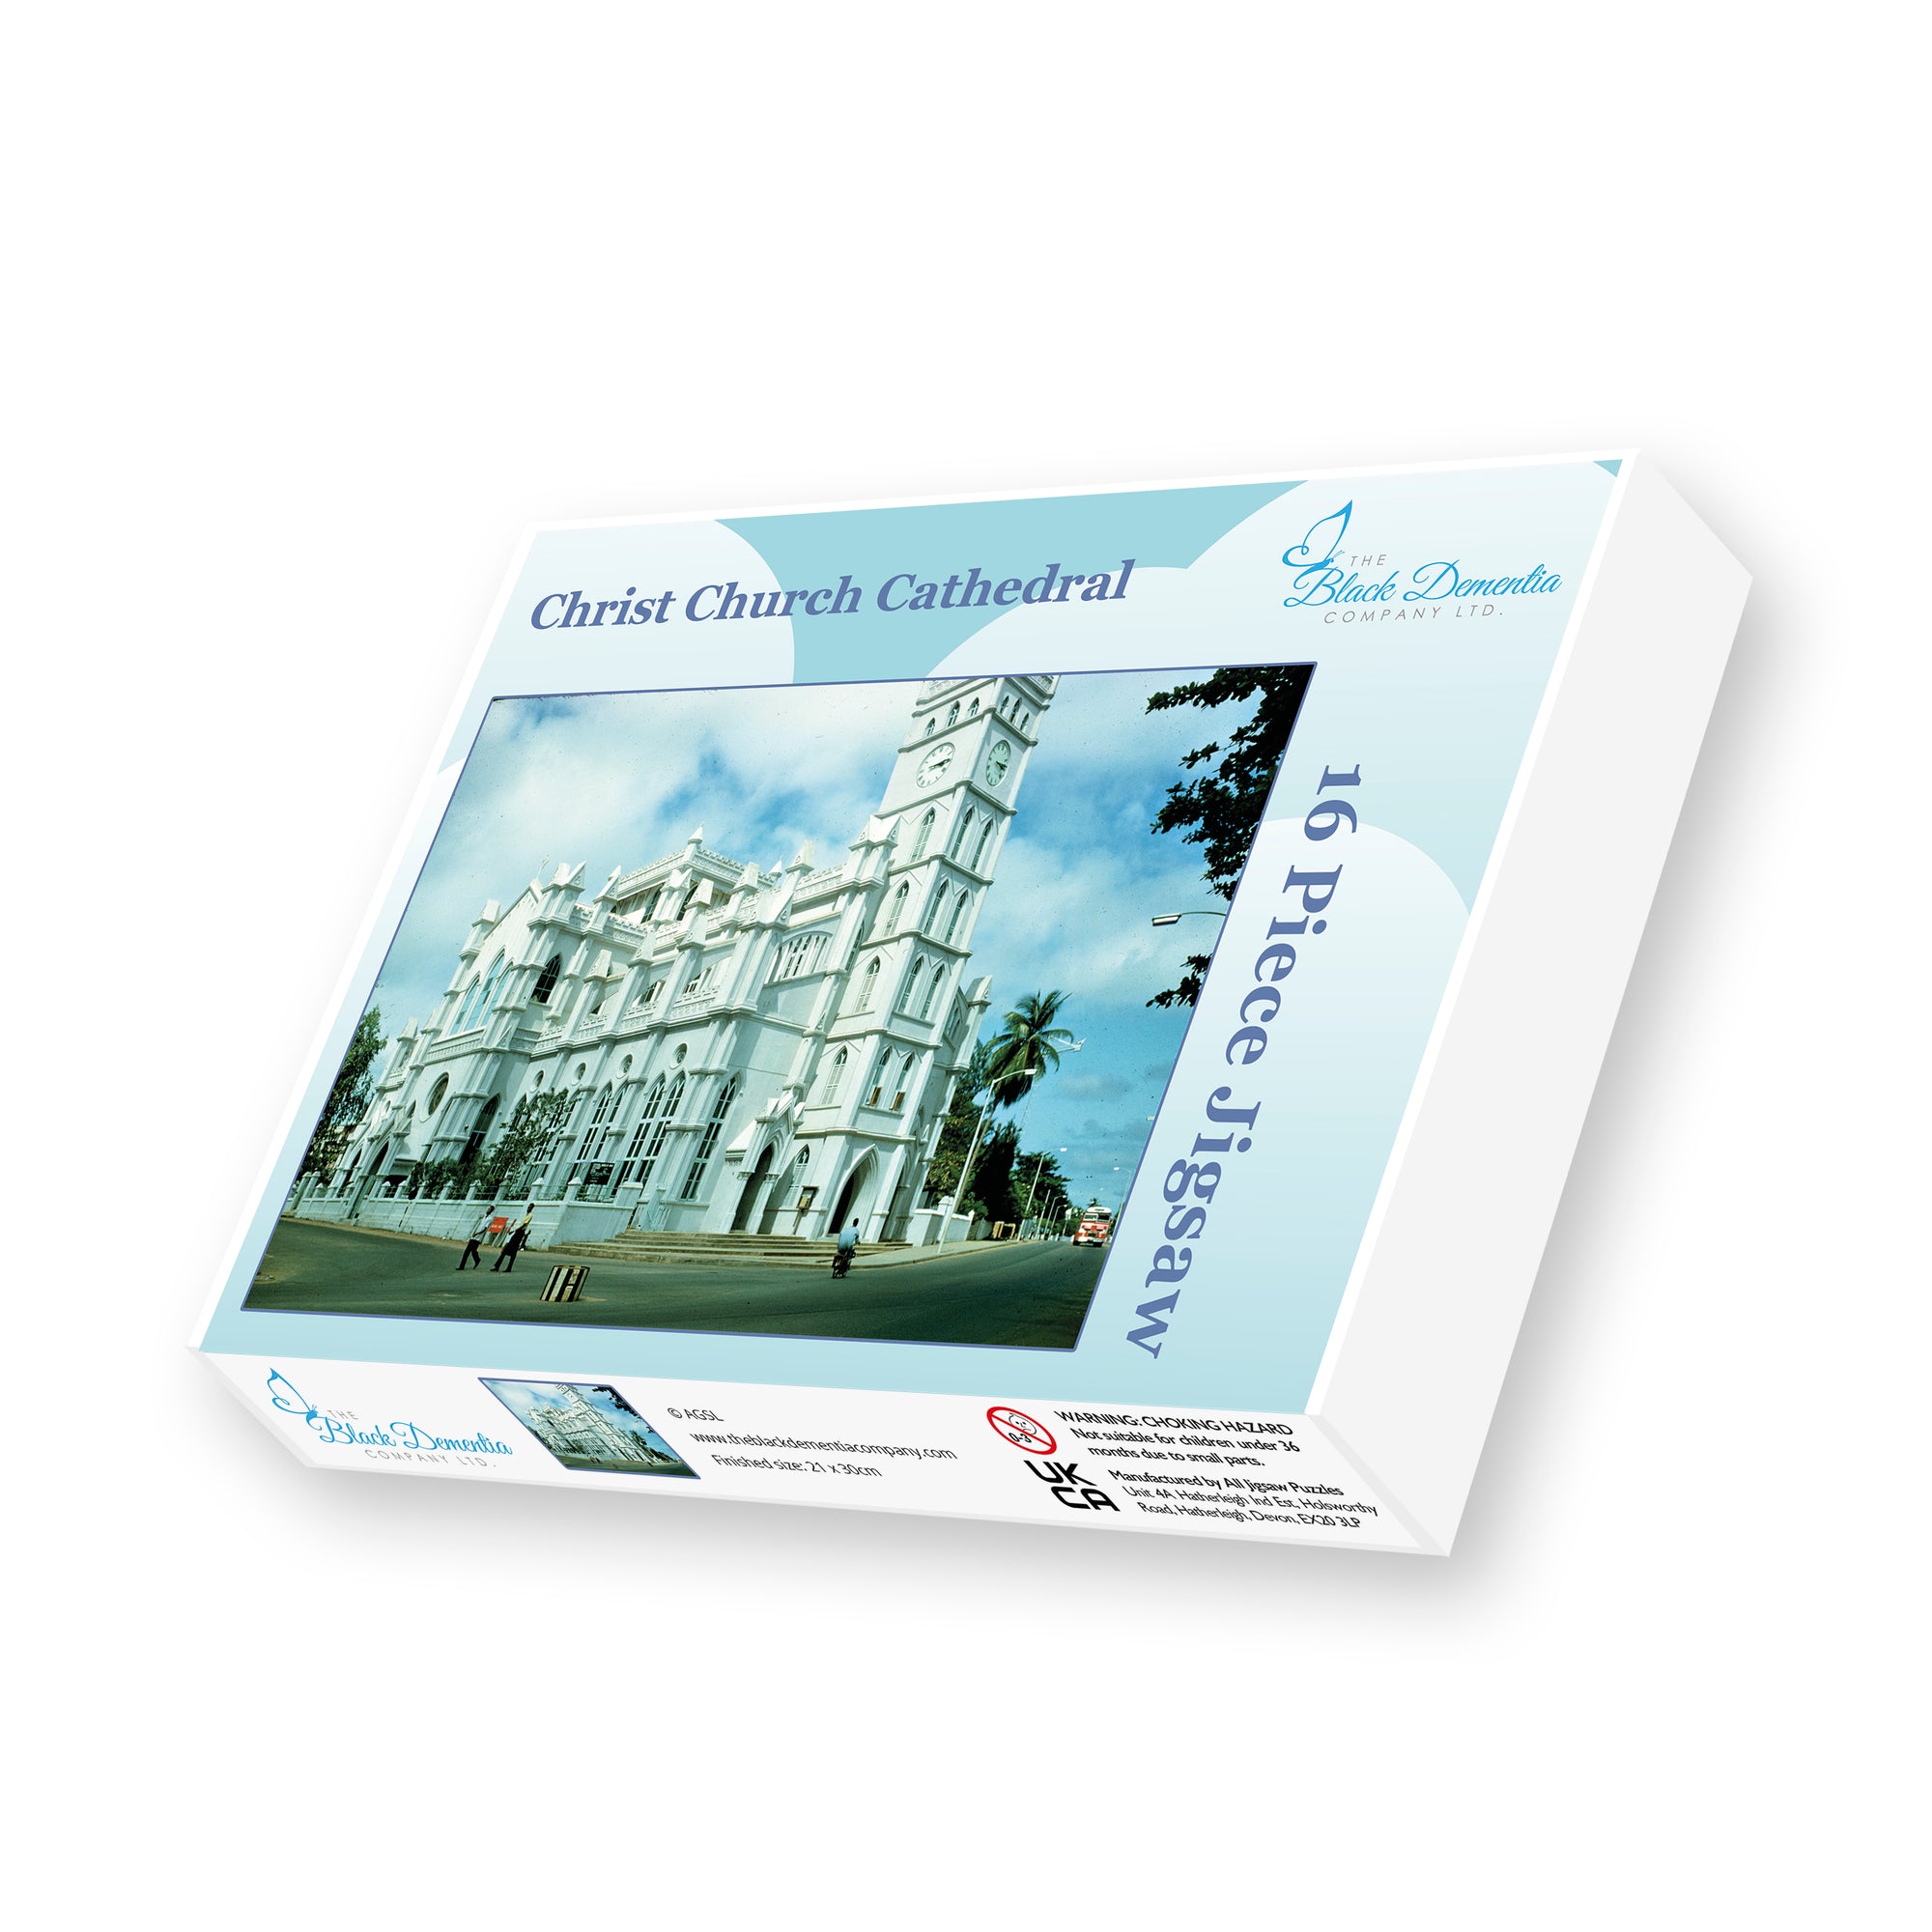 16 Piece Jigsaw Puzzle - Christ Church Cathedral